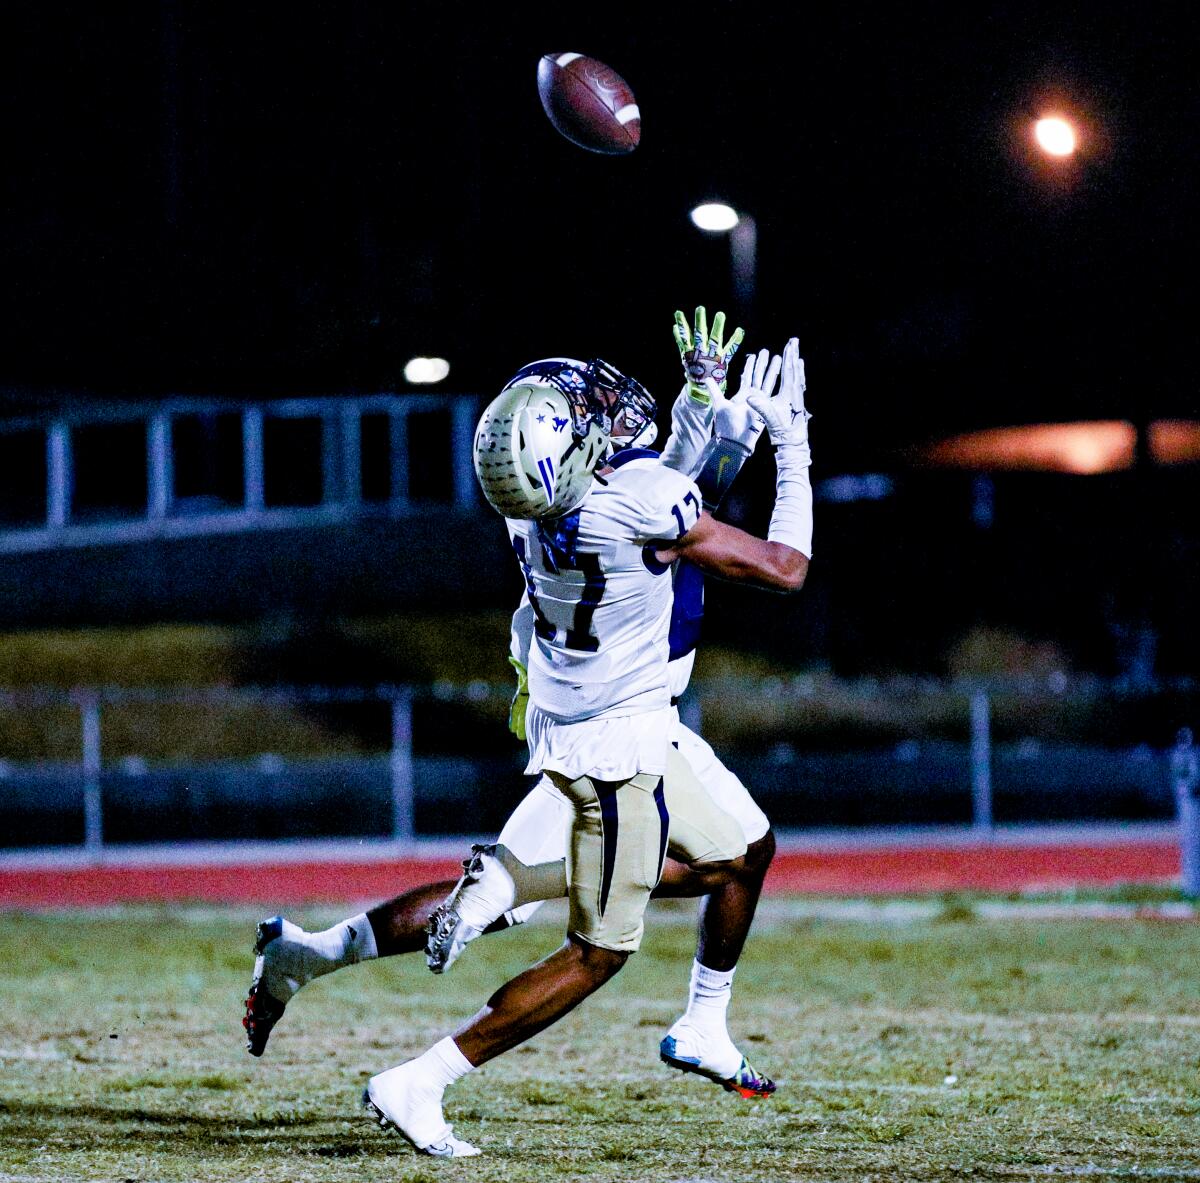 Peyton Waters of Birmingham reaches up for an interception.